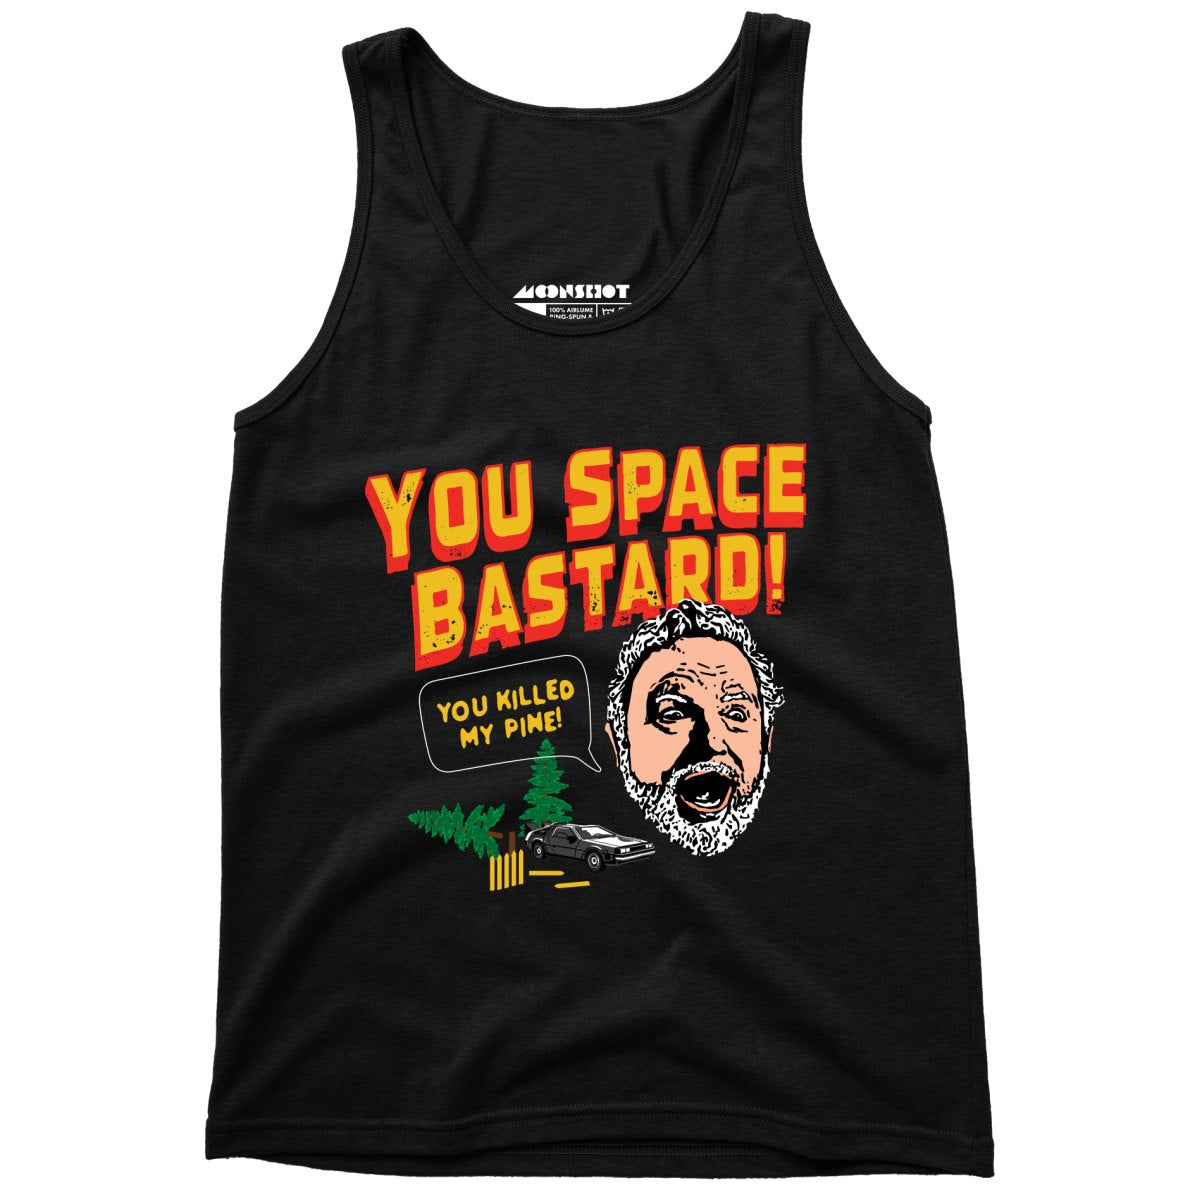 You Space Bastard! You Killed My Pine! - Unisex Tank Top